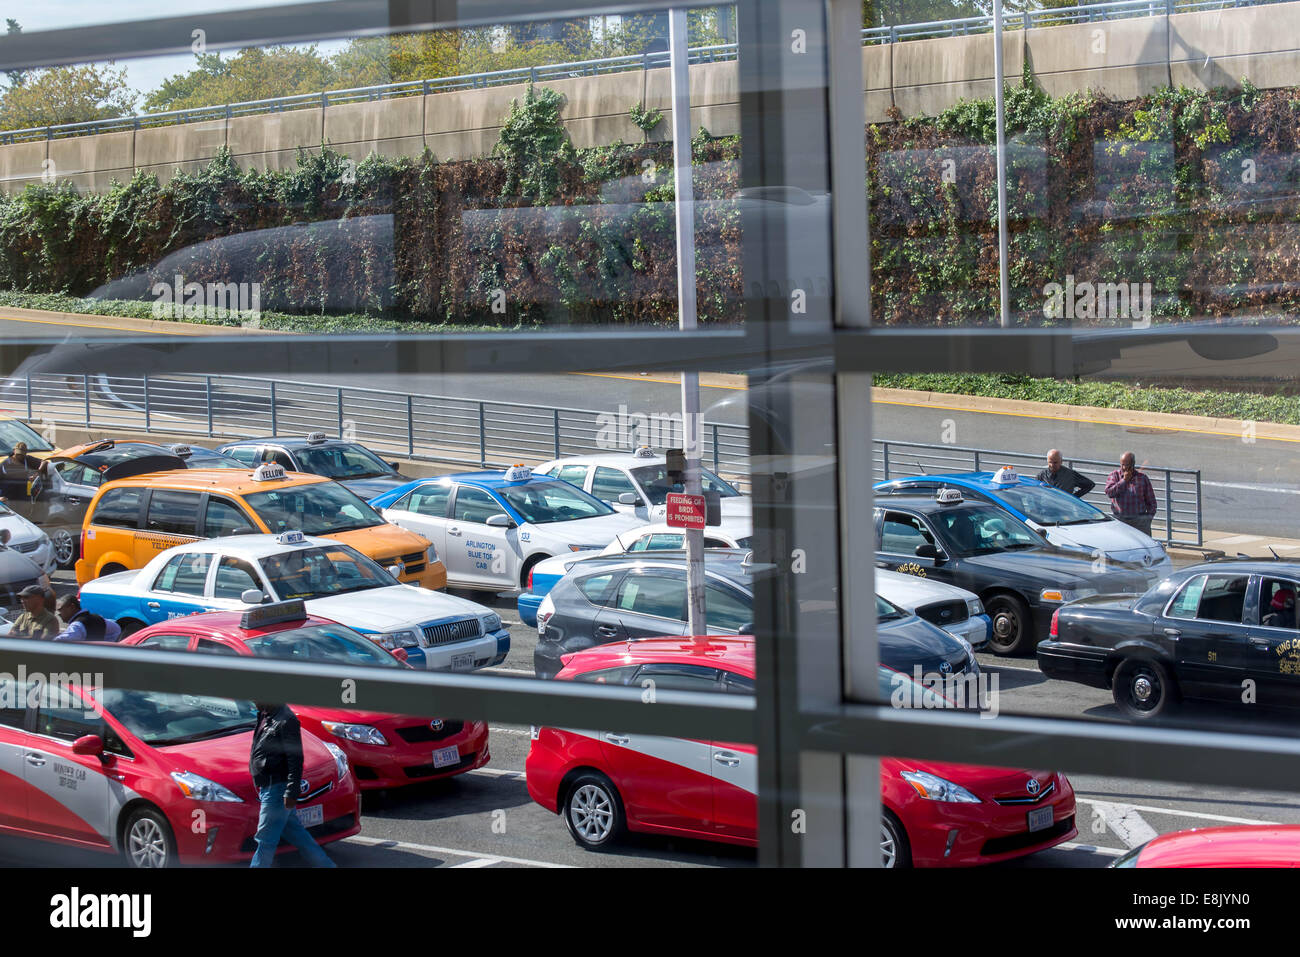 DCA, Reagan National Airport, Washington, DC - View of the taxi line out an airport window Stock Photo